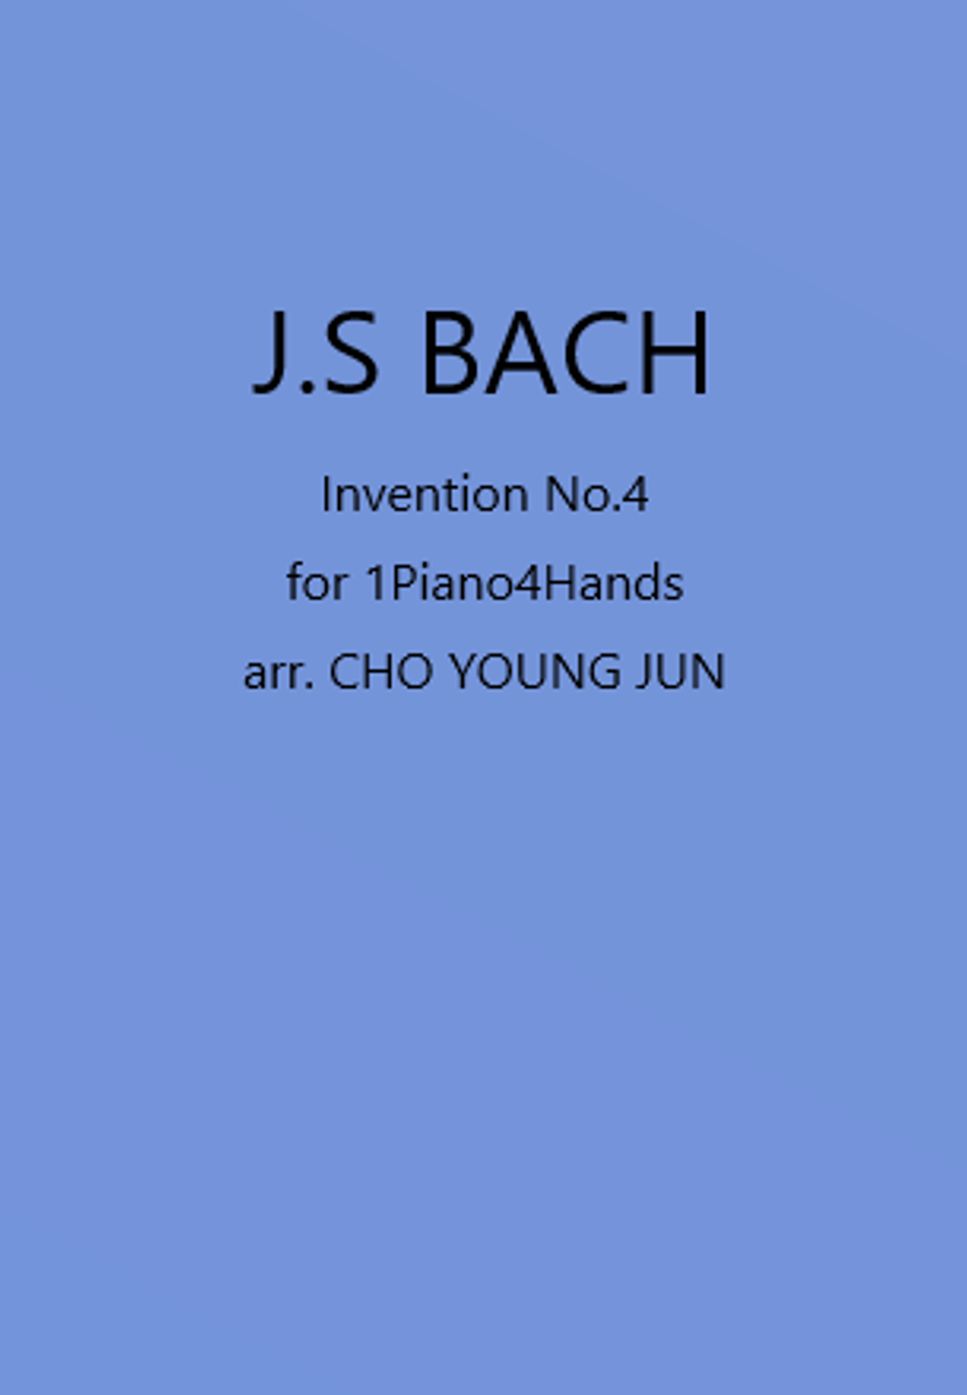 J.S Bach - J.S Bach Invention No.4 (J.S Bach Invention No.4 for 1Piano4Hands) by CHO YOUNG JUN